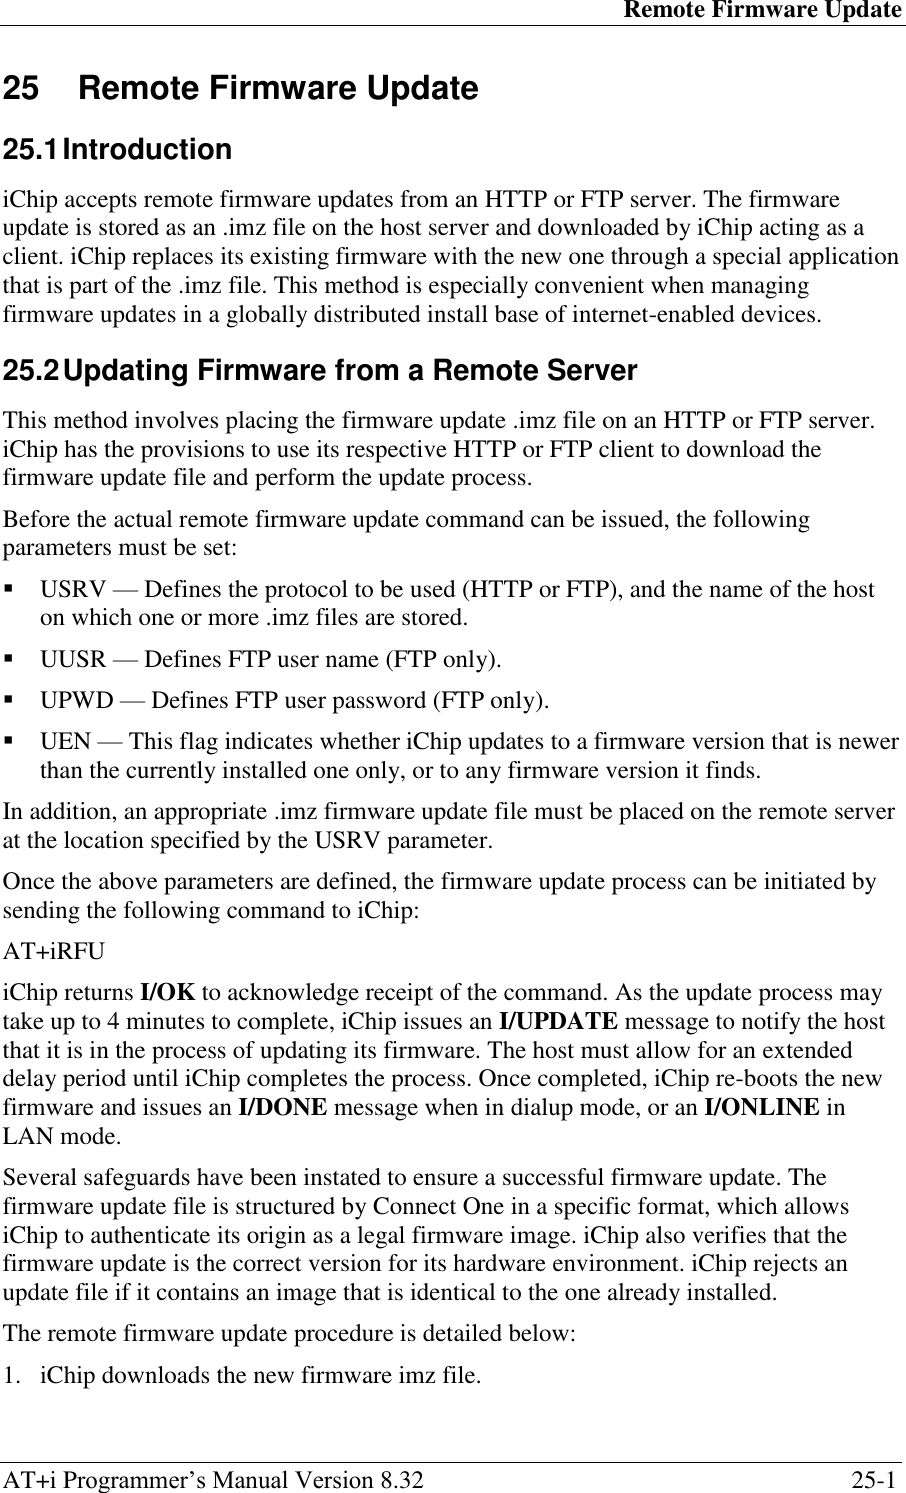 Remote Firmware Update AT+i Programmer‘s Manual Version 8.32  25-1 25  Remote Firmware Update  25.1 Introduction iChip accepts remote firmware updates from an HTTP or FTP server. The firmware update is stored as an .imz file on the host server and downloaded by iChip acting as a client. iChip replaces its existing firmware with the new one through a special application that is part of the .imz file. This method is especially convenient when managing firmware updates in a globally distributed install base of internet-enabled devices. 25.2 Updating Firmware from a Remote Server This method involves placing the firmware update .imz file on an HTTP or FTP server. iChip has the provisions to use its respective HTTP or FTP client to download the firmware update file and perform the update process. Before the actual remote firmware update command can be issued, the following parameters must be set:  USRV — Defines the protocol to be used (HTTP or FTP), and the name of the host on which one or more .imz files are stored.  UUSR — Defines FTP user name (FTP only).  UPWD — Defines FTP user password (FTP only).  UEN — This flag indicates whether iChip updates to a firmware version that is newer than the currently installed one only, or to any firmware version it finds. In addition, an appropriate .imz firmware update file must be placed on the remote server at the location specified by the USRV parameter. Once the above parameters are defined, the firmware update process can be initiated by sending the following command to iChip: AT+iRFU iChip returns I/OK to acknowledge receipt of the command. As the update process may take up to 4 minutes to complete, iChip issues an I/UPDATE message to notify the host that it is in the process of updating its firmware. The host must allow for an extended delay period until iChip completes the process. Once completed, iChip re-boots the new firmware and issues an I/DONE message when in dialup mode, or an I/ONLINE in LAN mode. Several safeguards have been instated to ensure a successful firmware update. The firmware update file is structured by Connect One in a specific format, which allows iChip to authenticate its origin as a legal firmware image. iChip also verifies that the firmware update is the correct version for its hardware environment. iChip rejects an update file if it contains an image that is identical to the one already installed. The remote firmware update procedure is detailed below: 1. iChip downloads the new firmware imz file. 